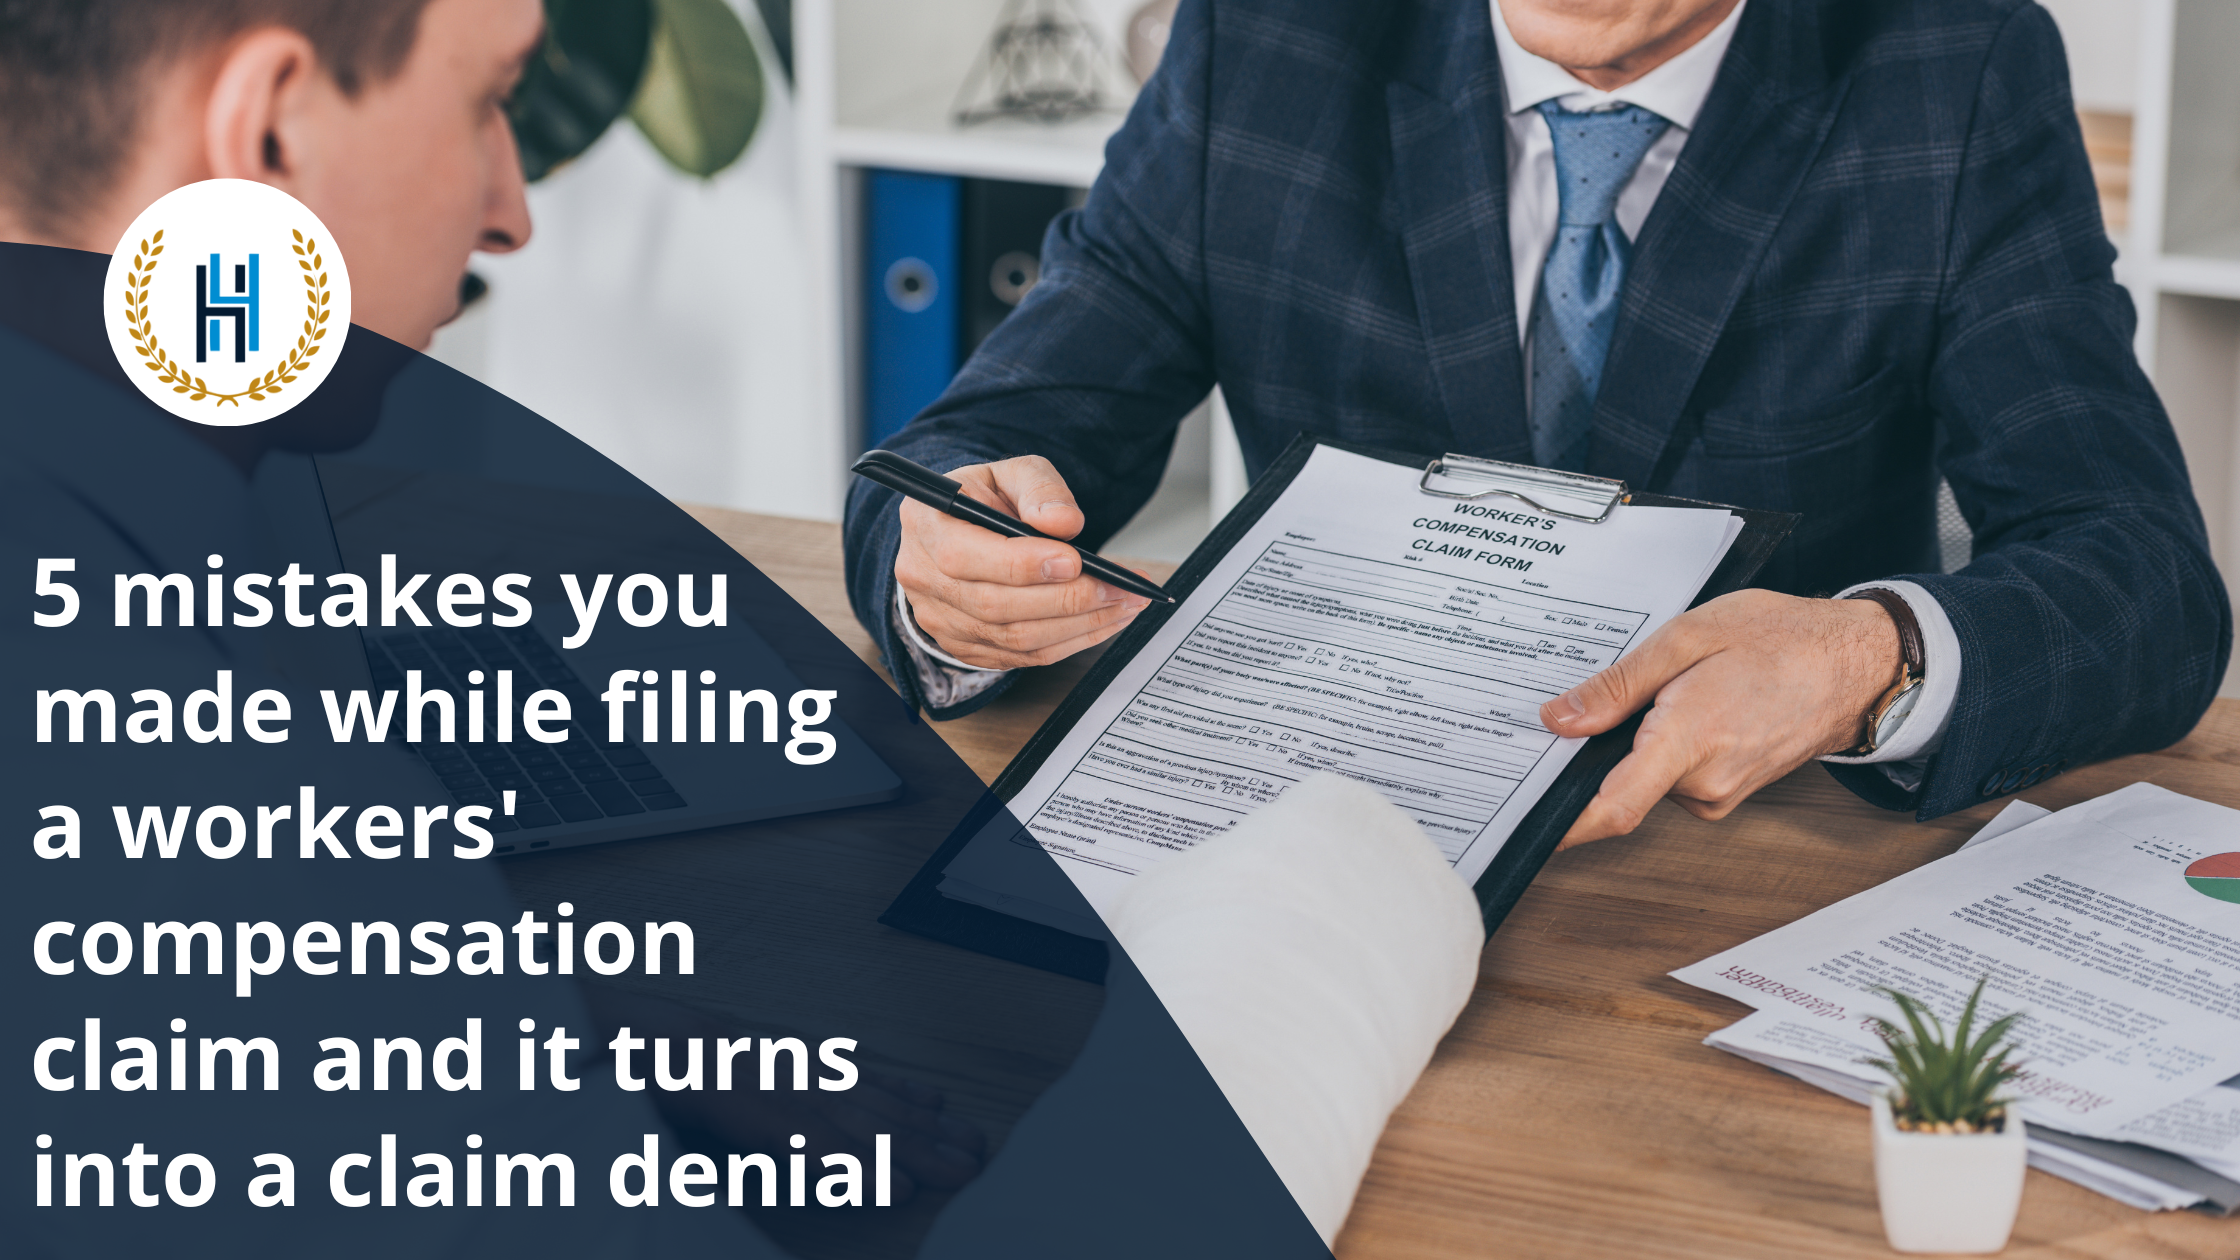 5 mistakes you made while filing a workers' compensation claim and it turns into a claim denial | 2H Law Firm